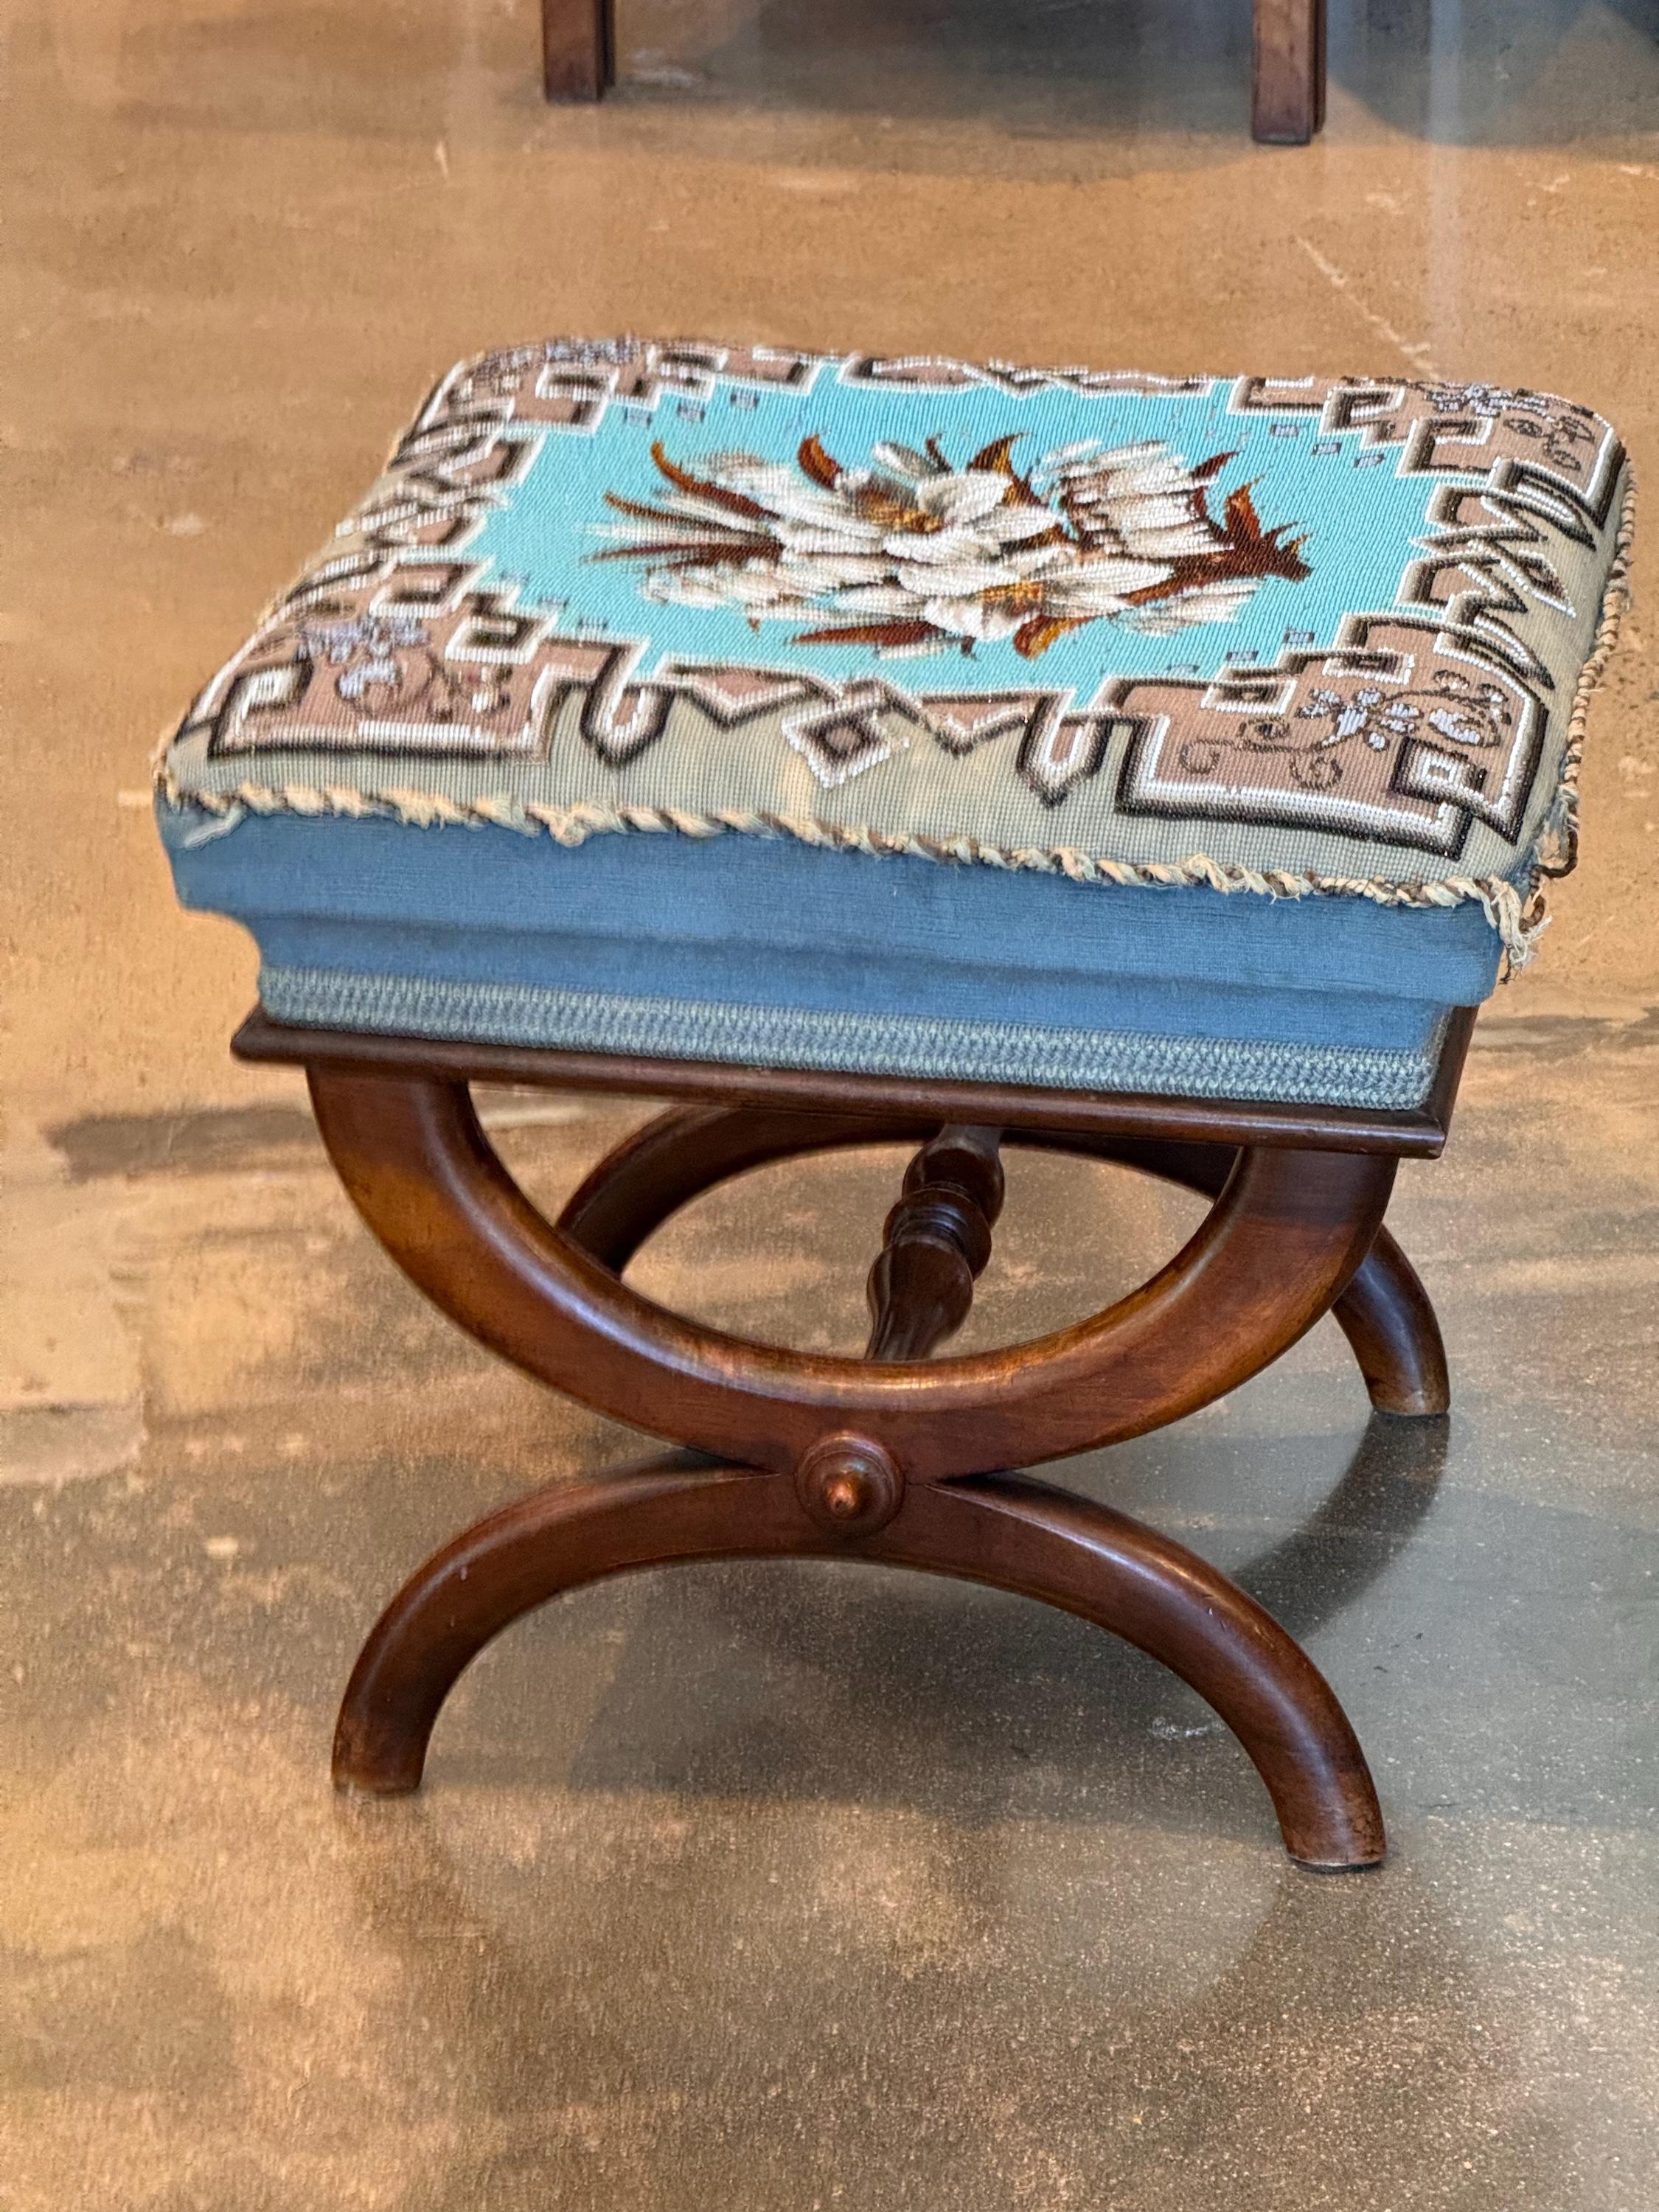 This stool has a beautiful beaded covering. A classic design.